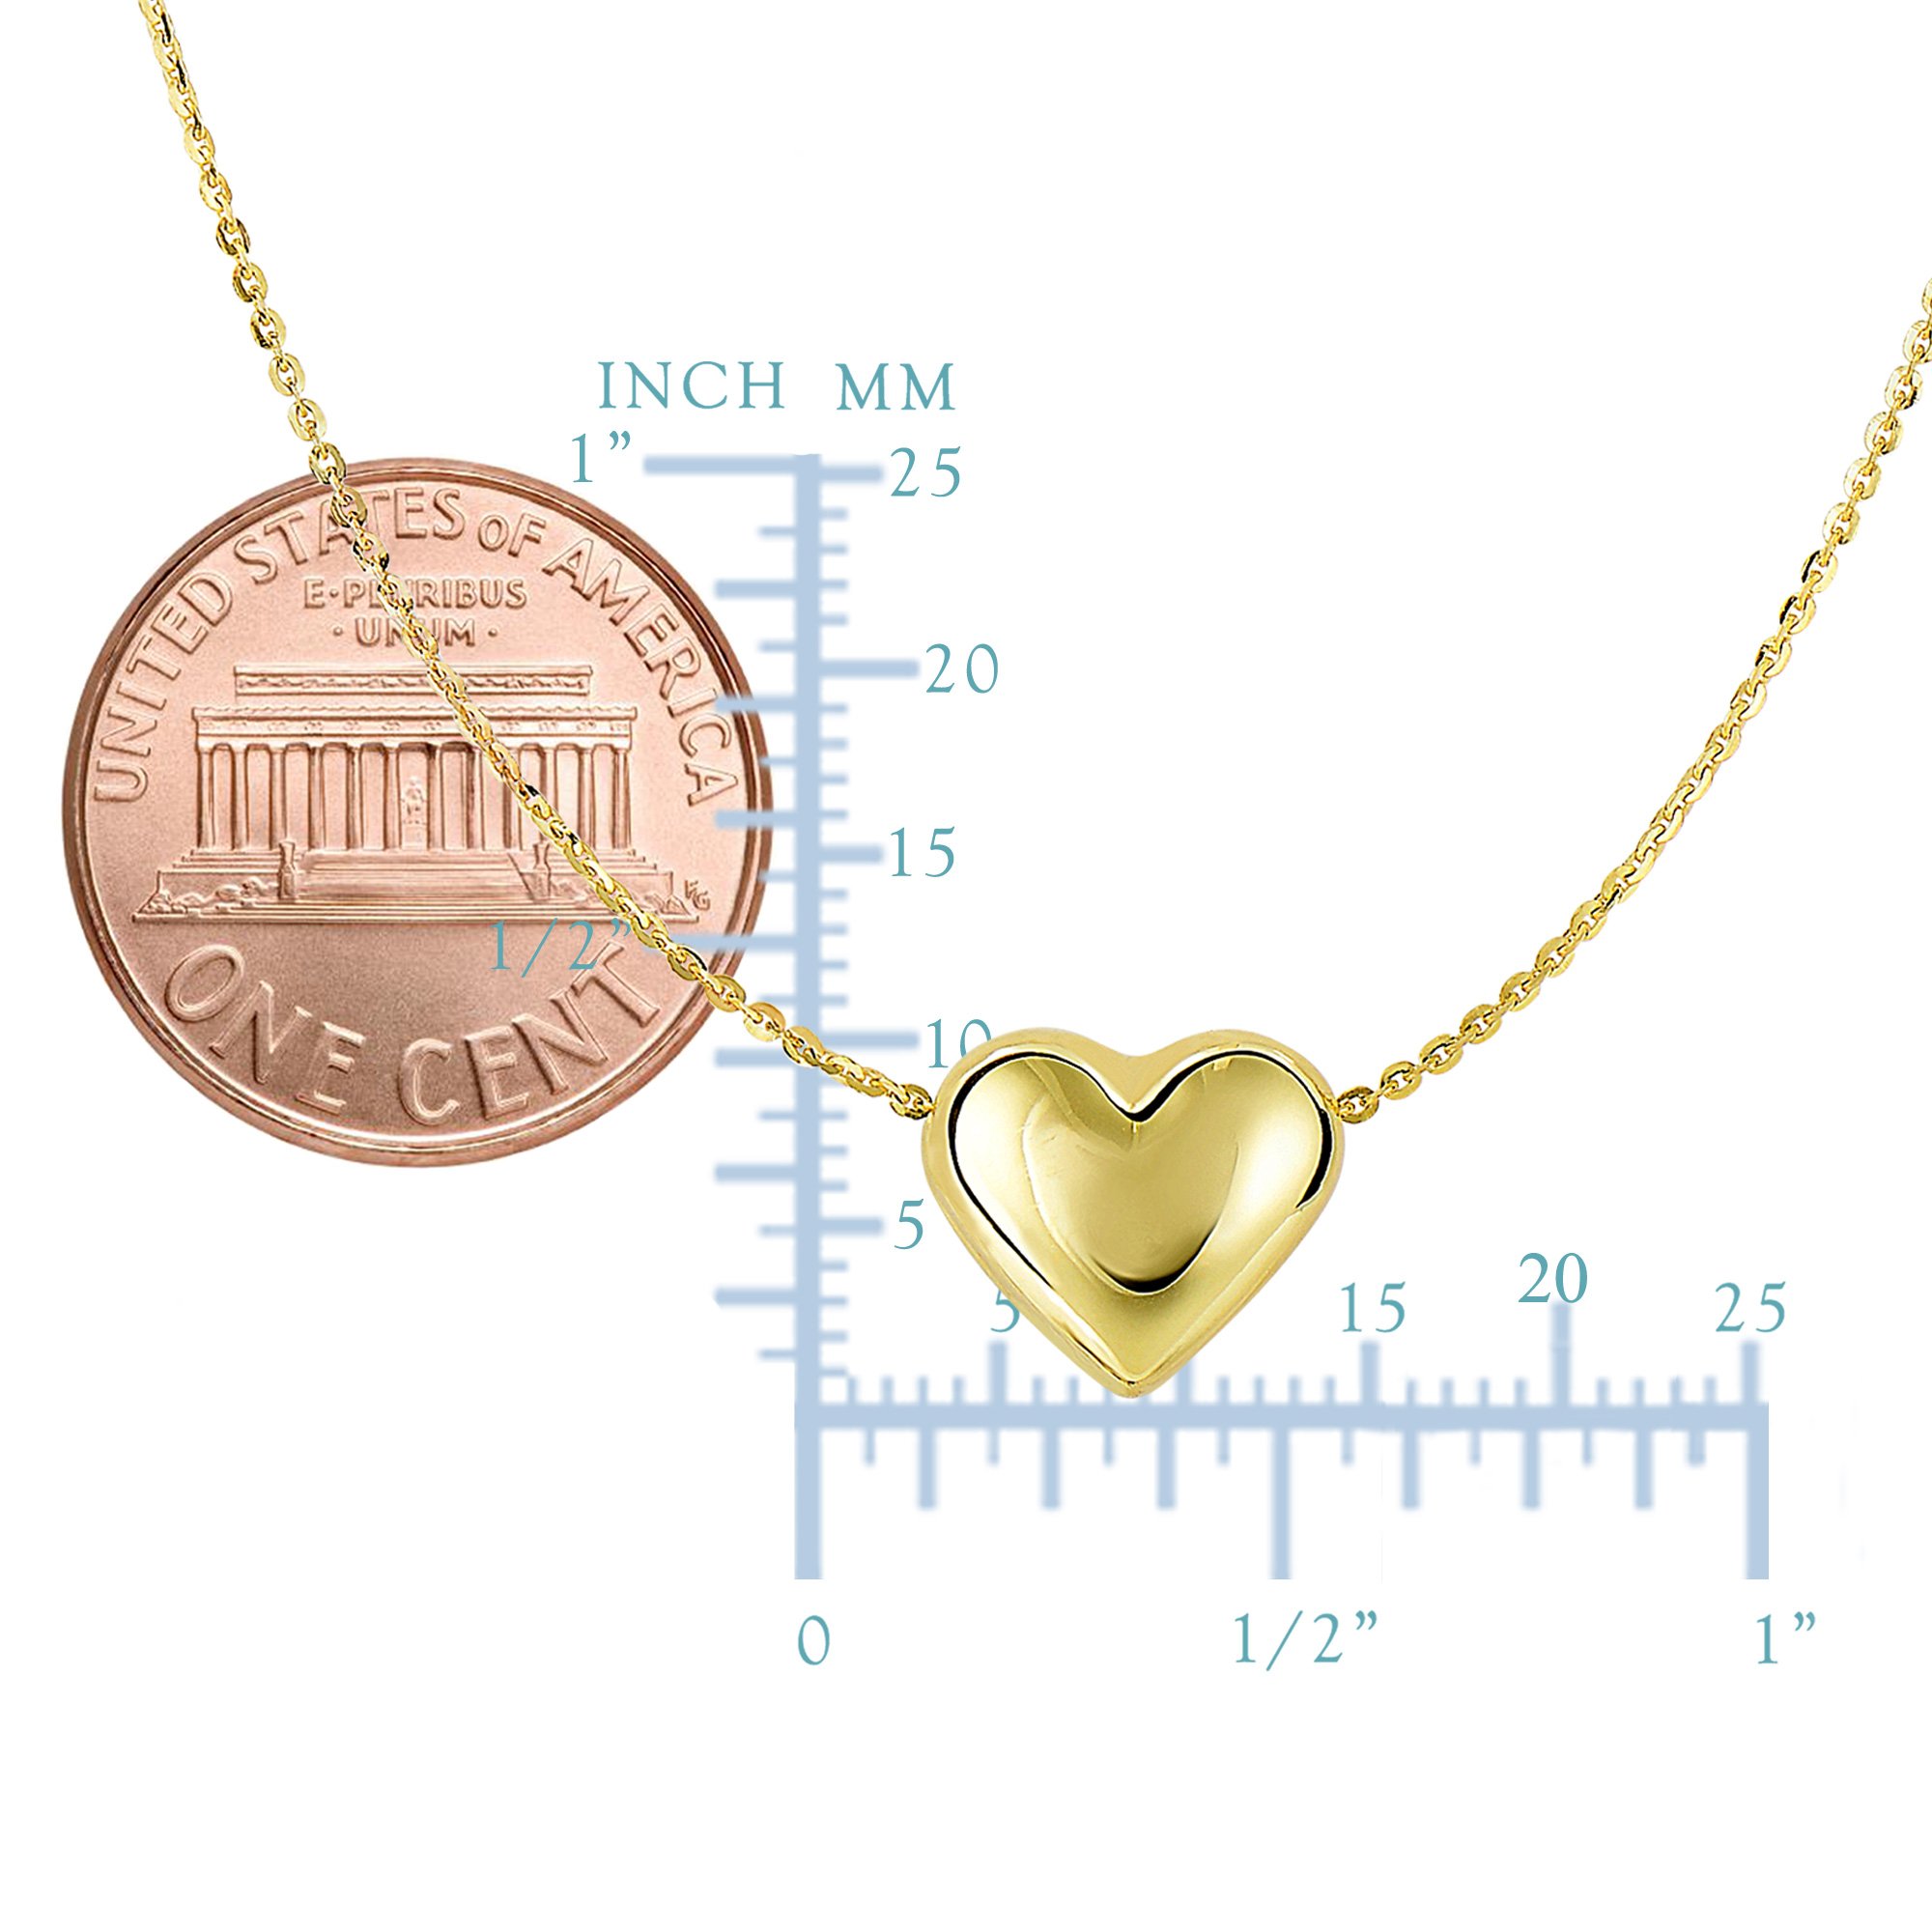 Jewelry Affairs 14k Yellow Gold Sliding Puffed Heart Pendant Necklace, 18